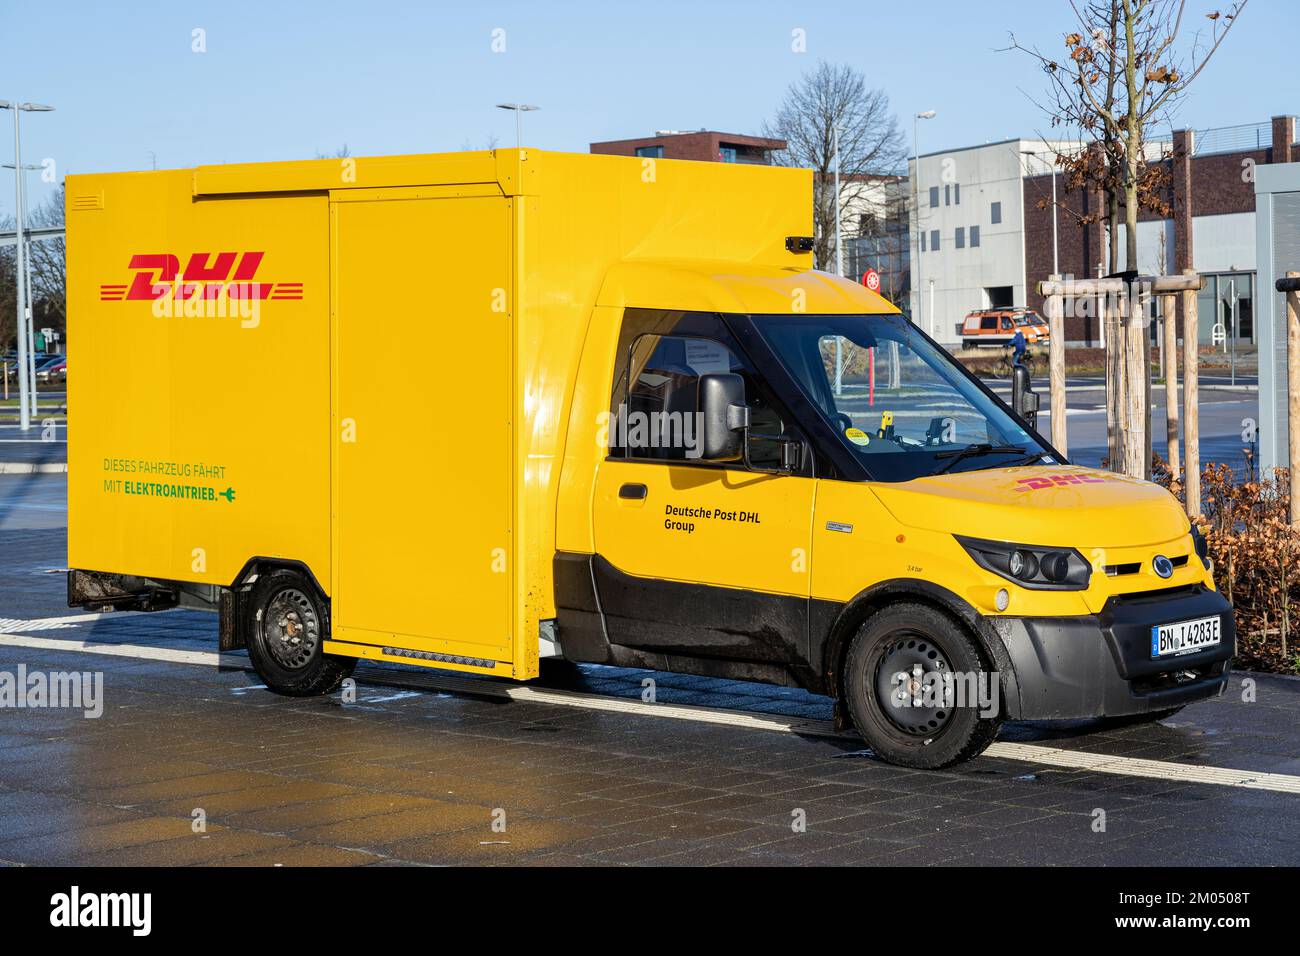 DHL StreetScooter Gigabox Stock Photo